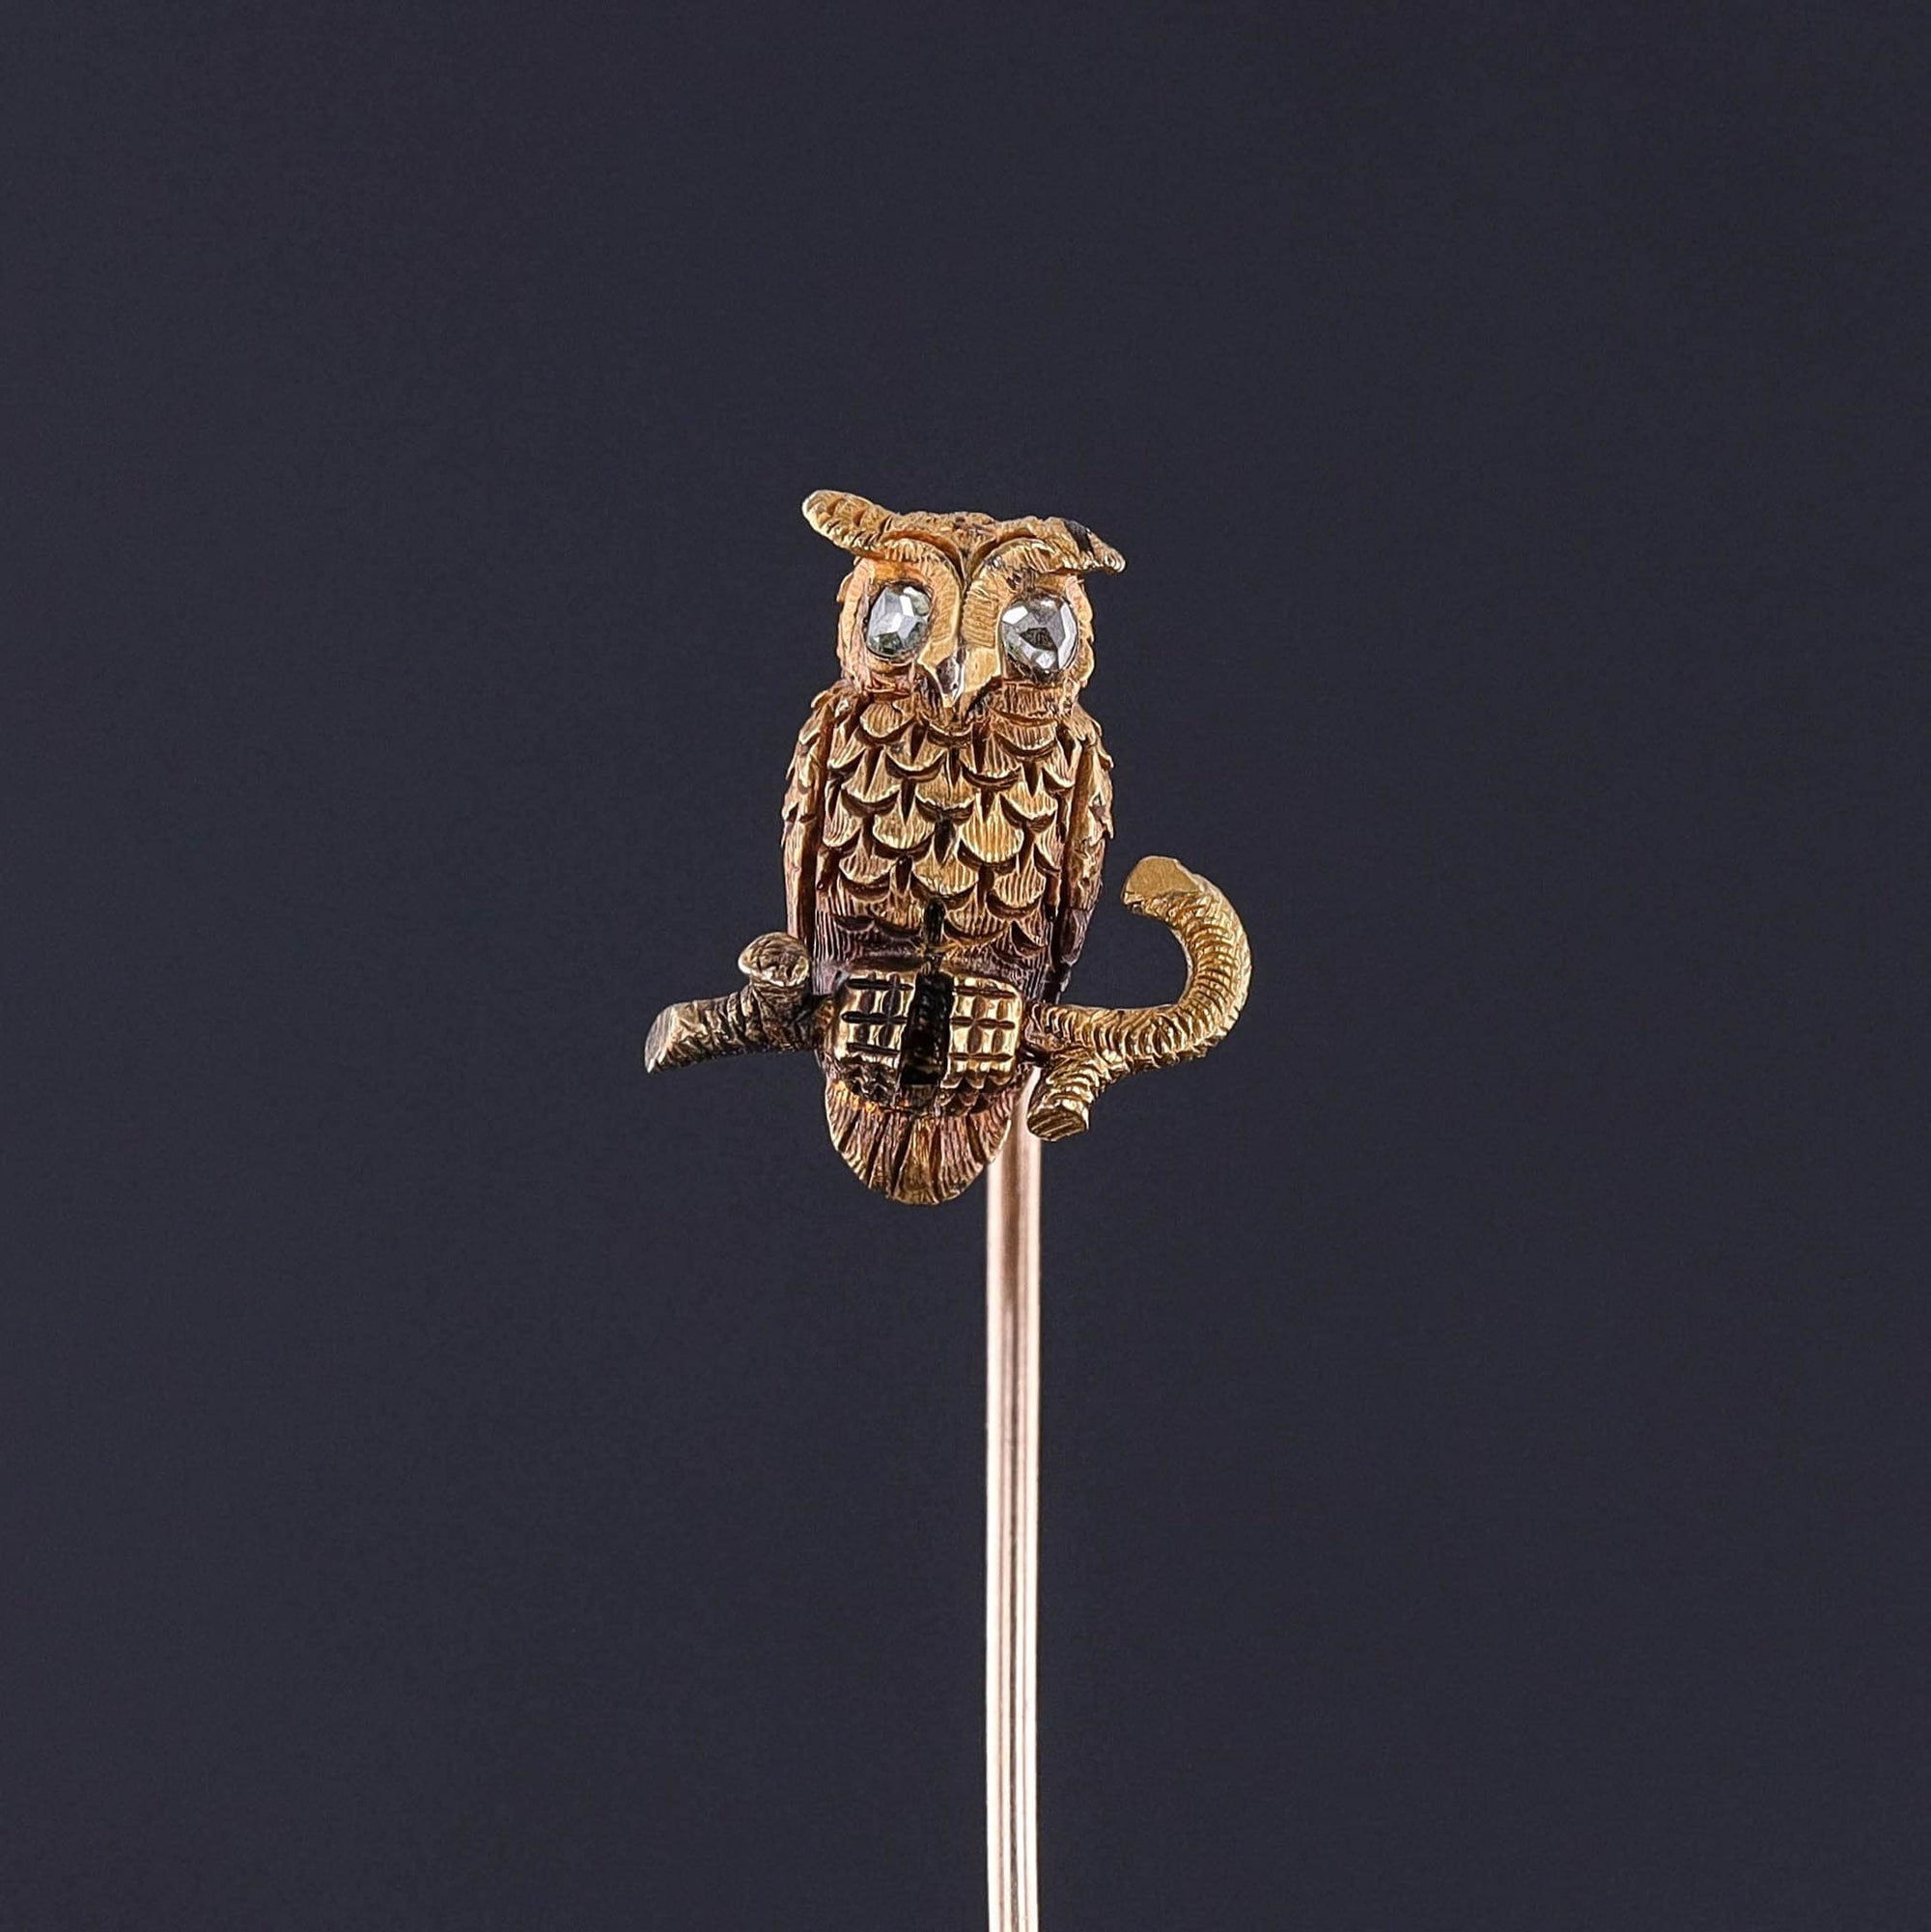 Antique owl stickpin dating to the late Victorian era. The pin is solid 14k gold and the owl has rose cut diamond eyes. It is fine men&#39;s jewelry or also for a woman. It can be worn on a lapel. A great gift for a jewelry collector.